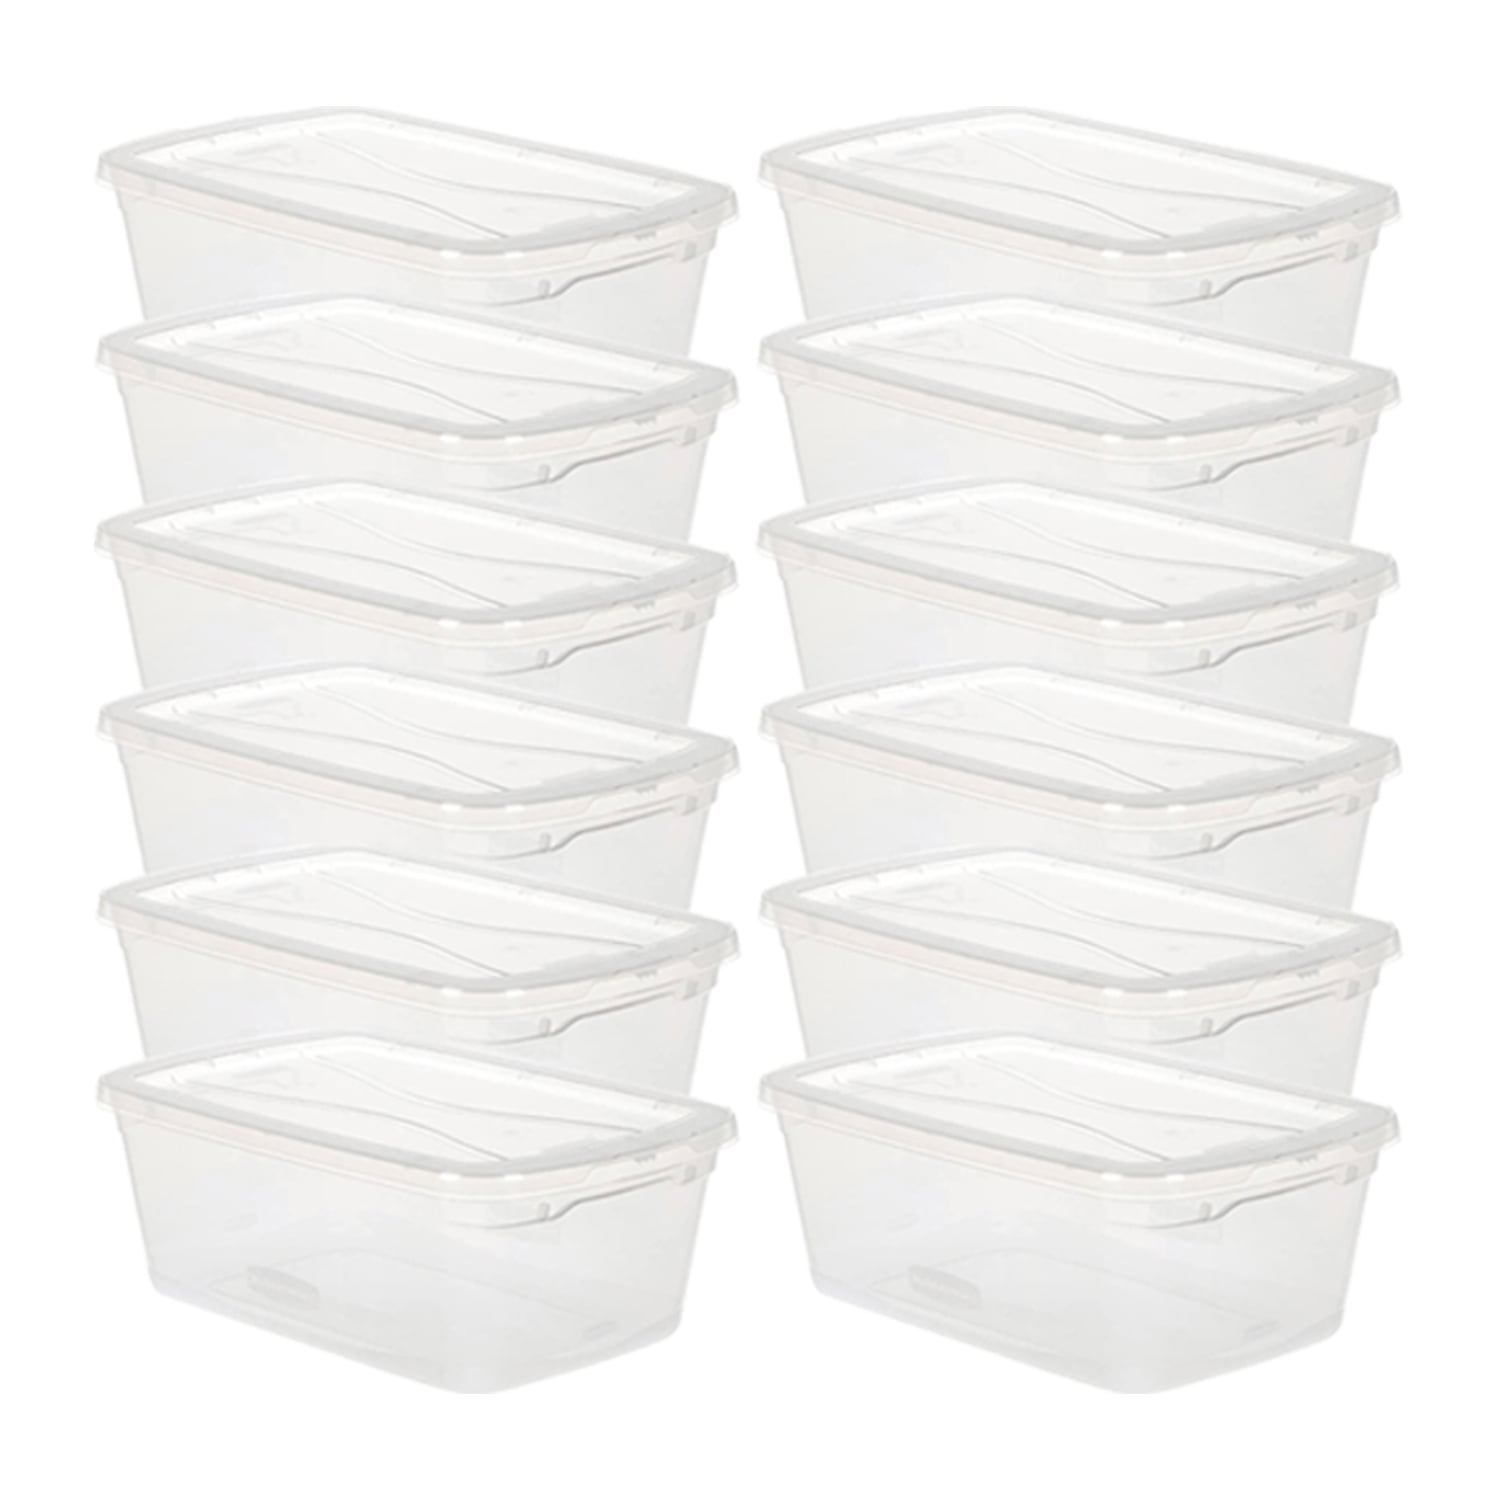  Rubbermaid Tray for 71 Qt Cleverstore Clear Plastic Storage Bins,  Pack of 2, Clear Plastic Tray with Built-In Handles, Maximize Storage,  Great for Small or Delicate Items : Everything Else